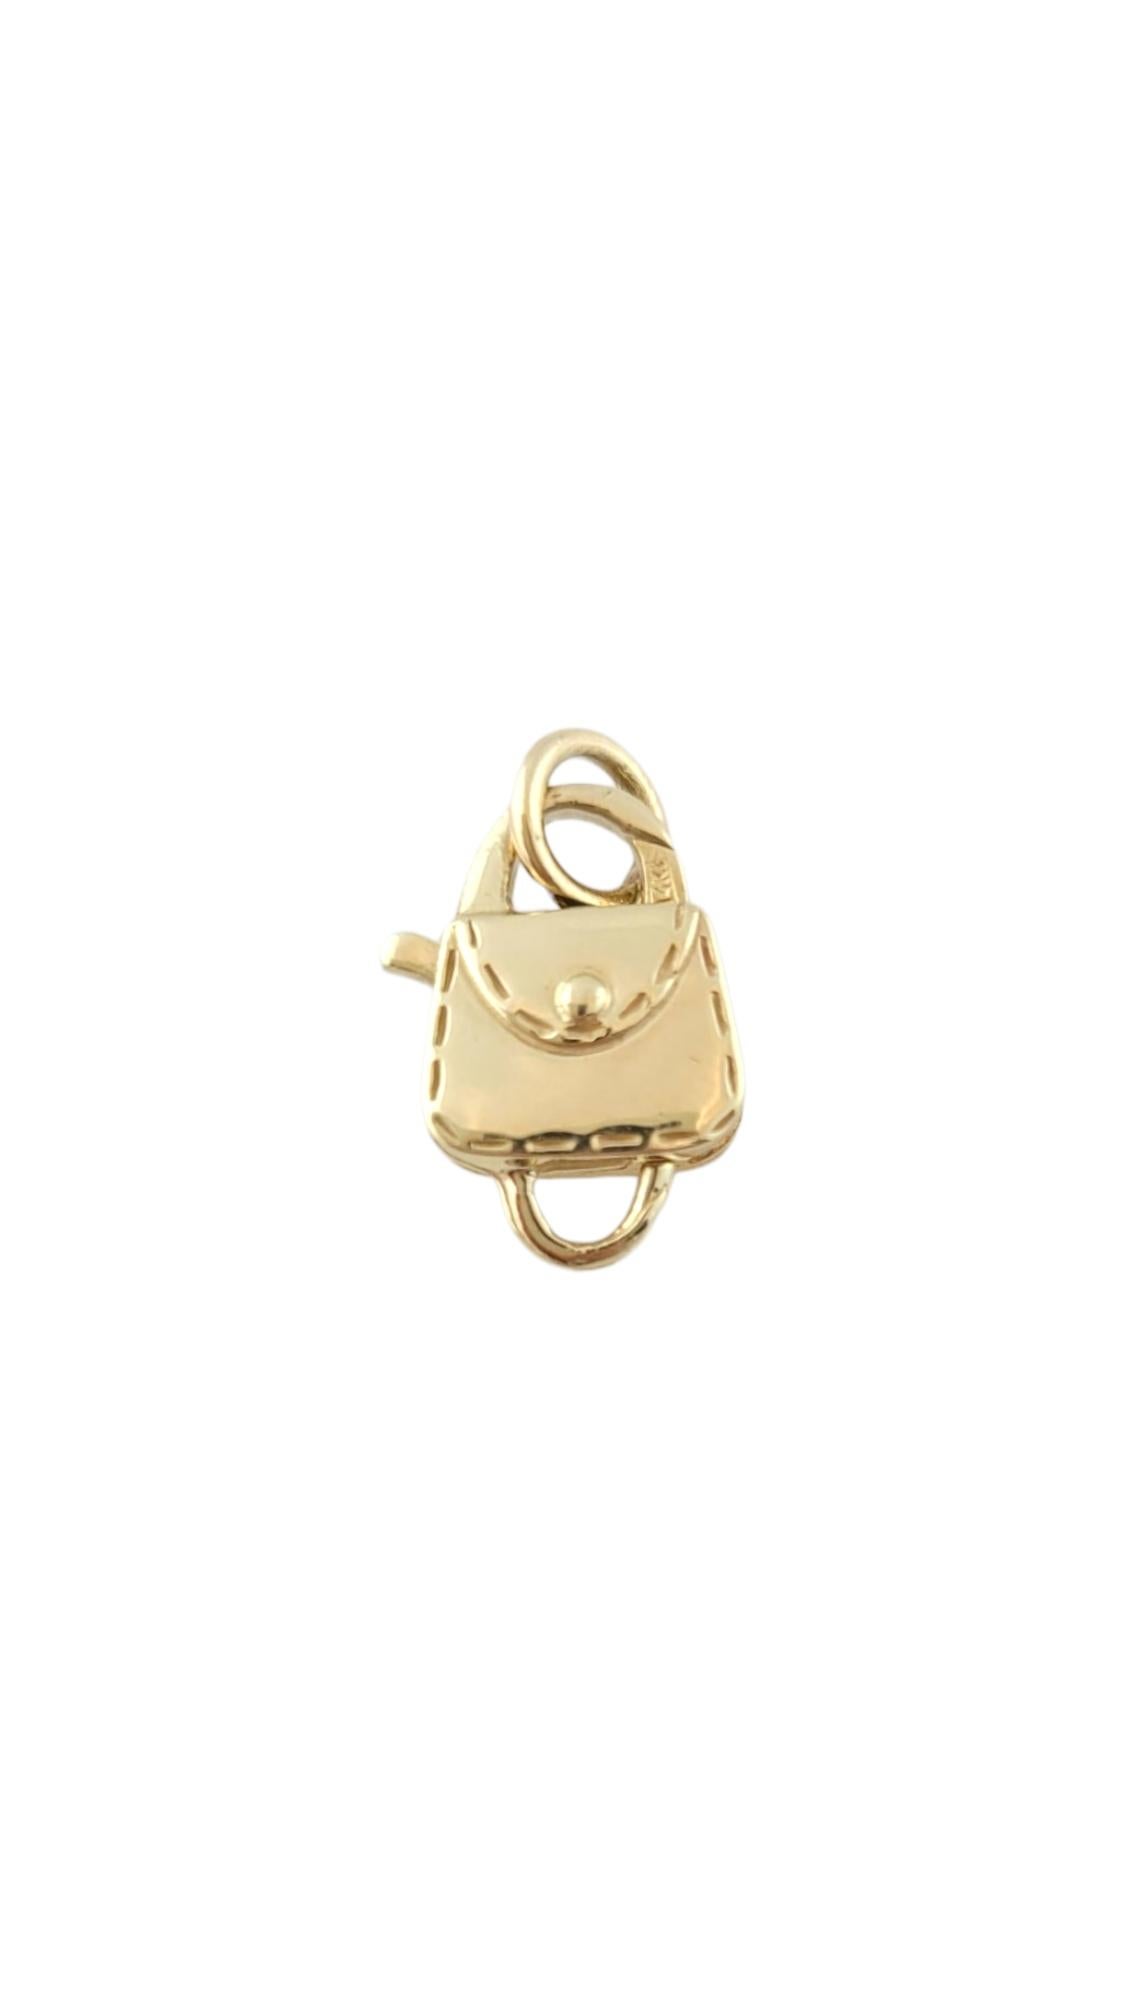 Vintage 14K Yellow Gold Purse Charm -

Enhance your style with this delicately detailed purse charm.

Size: 14.5mm X 10.9mm 

Weight: 2.3 g/ 1.4dwt

Hallmark: 14KT Italy 

*Chain not included*

Very good condition, professionally polished.

Will